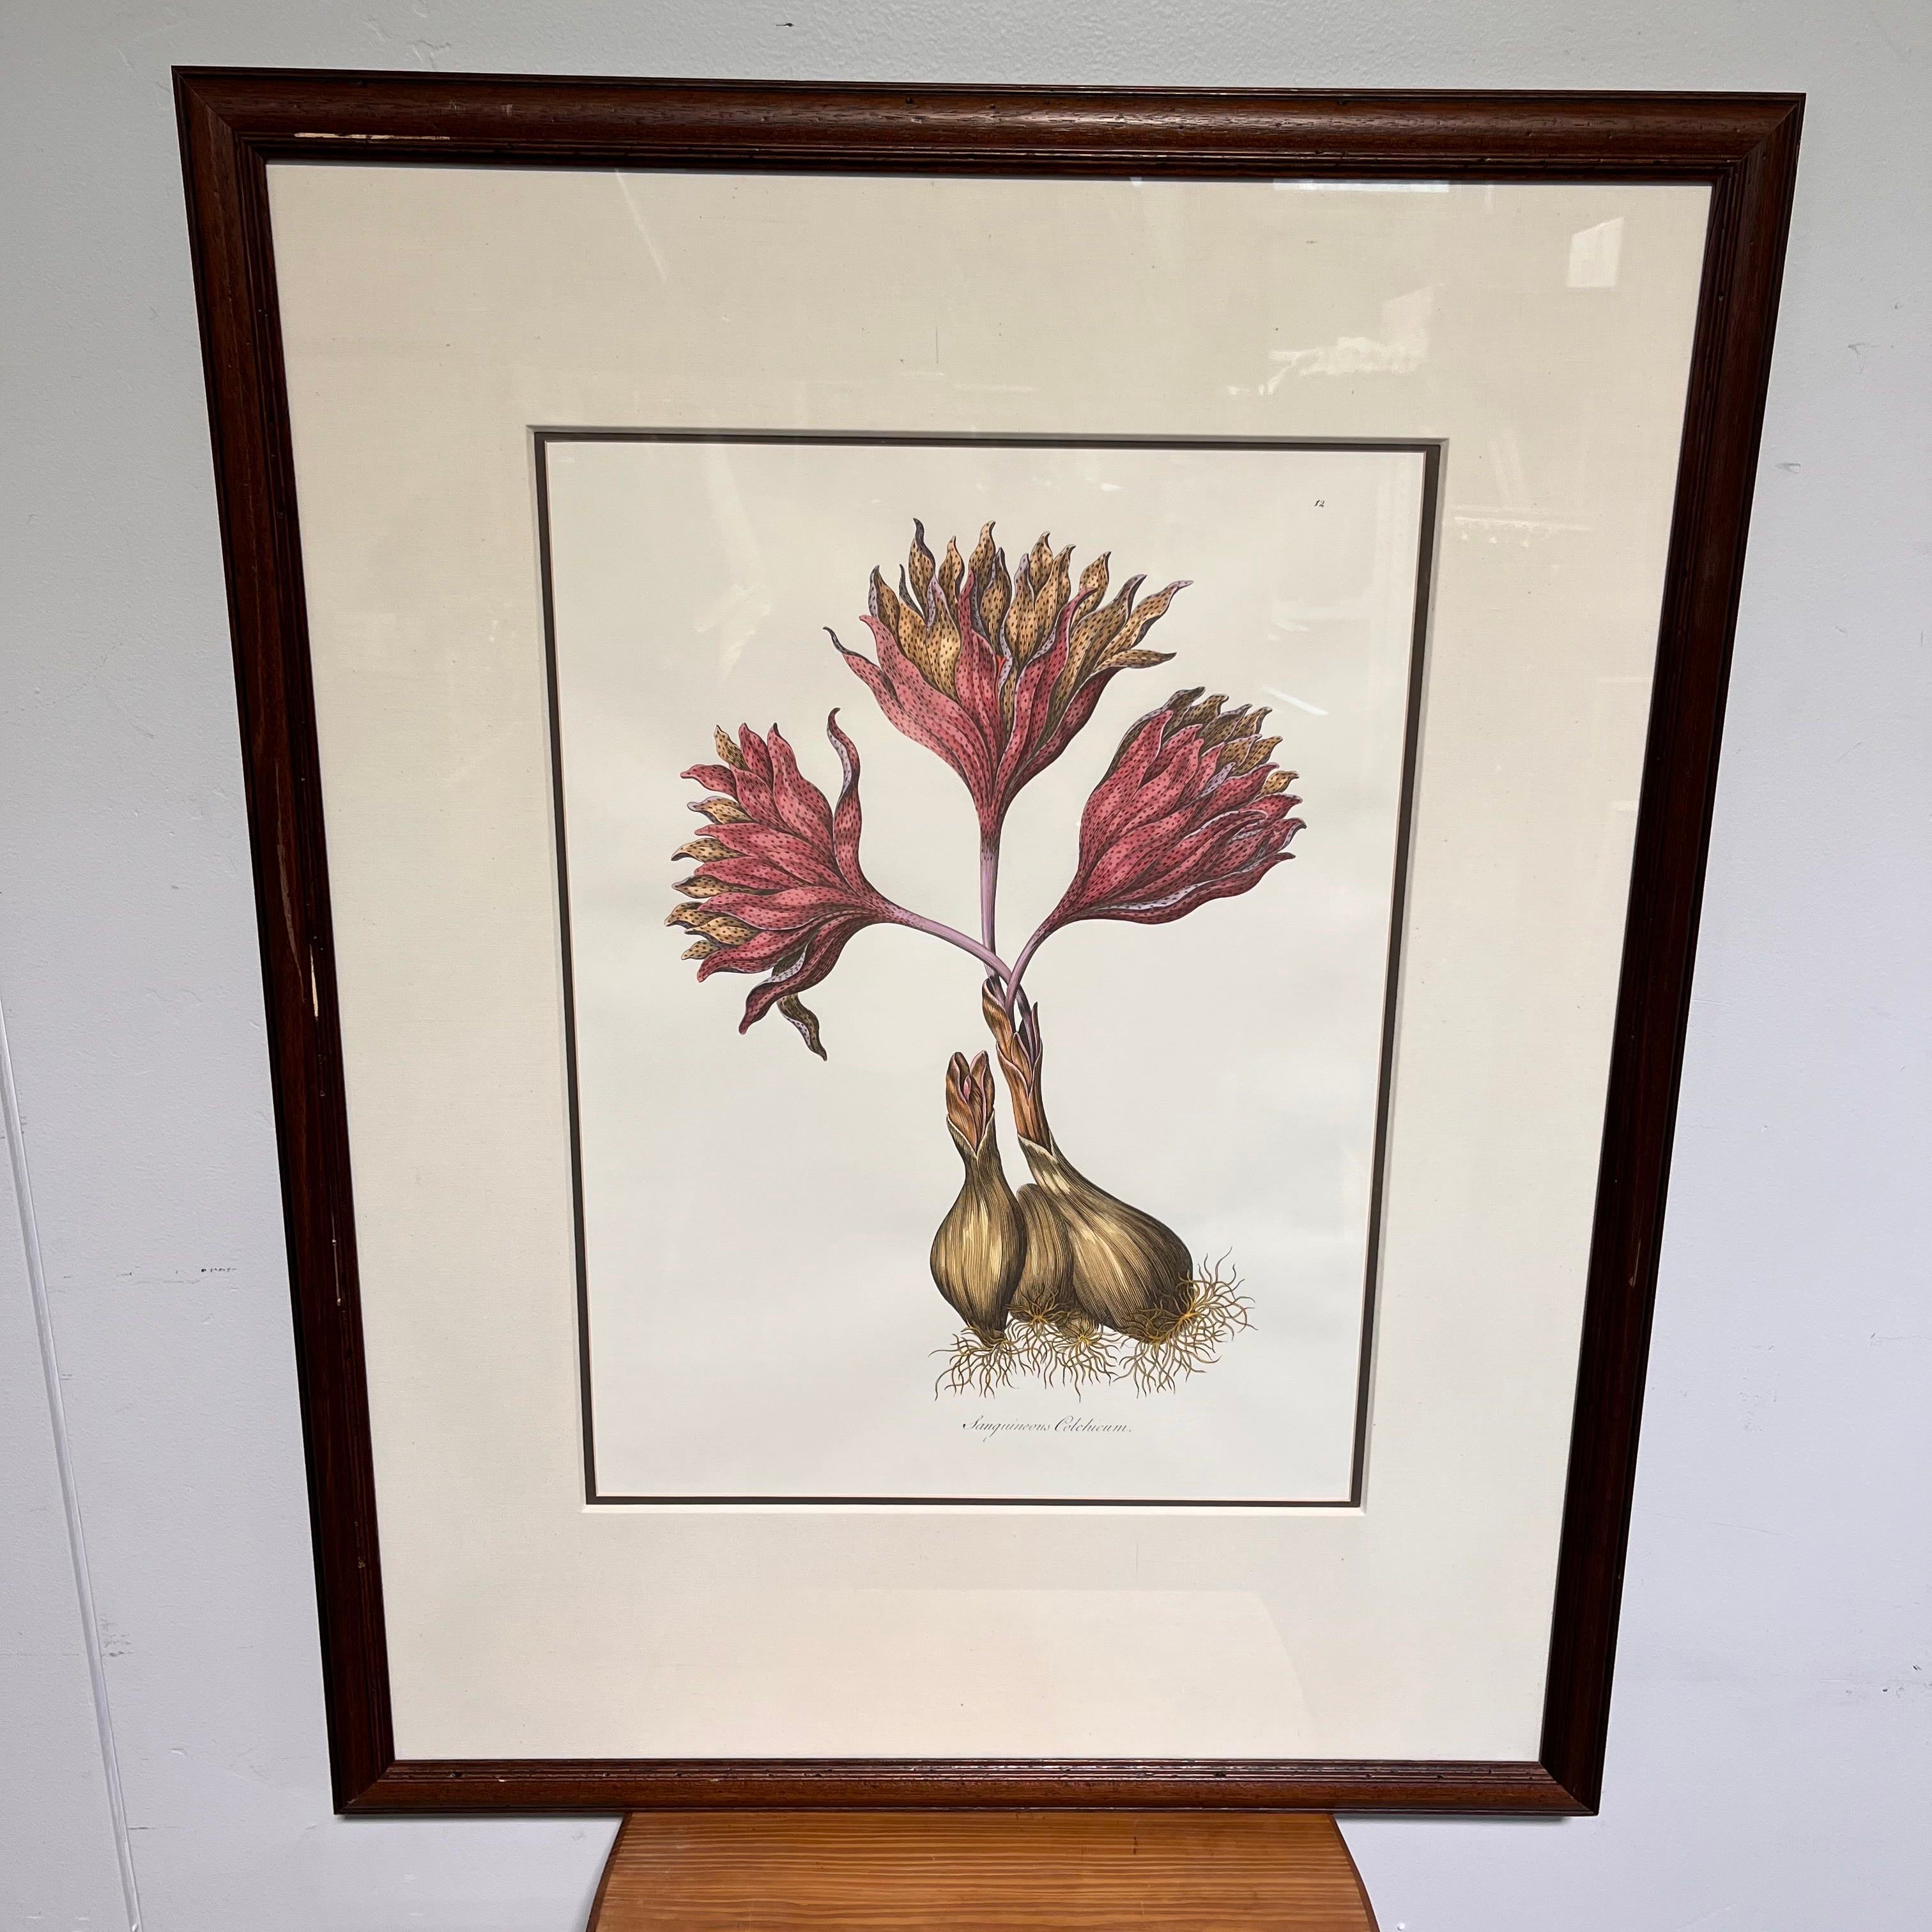 "Sanguineous Colchicum" by John Hill Engraved and Colored Print from Exotic Botany Illustrated 1759 Wall Art